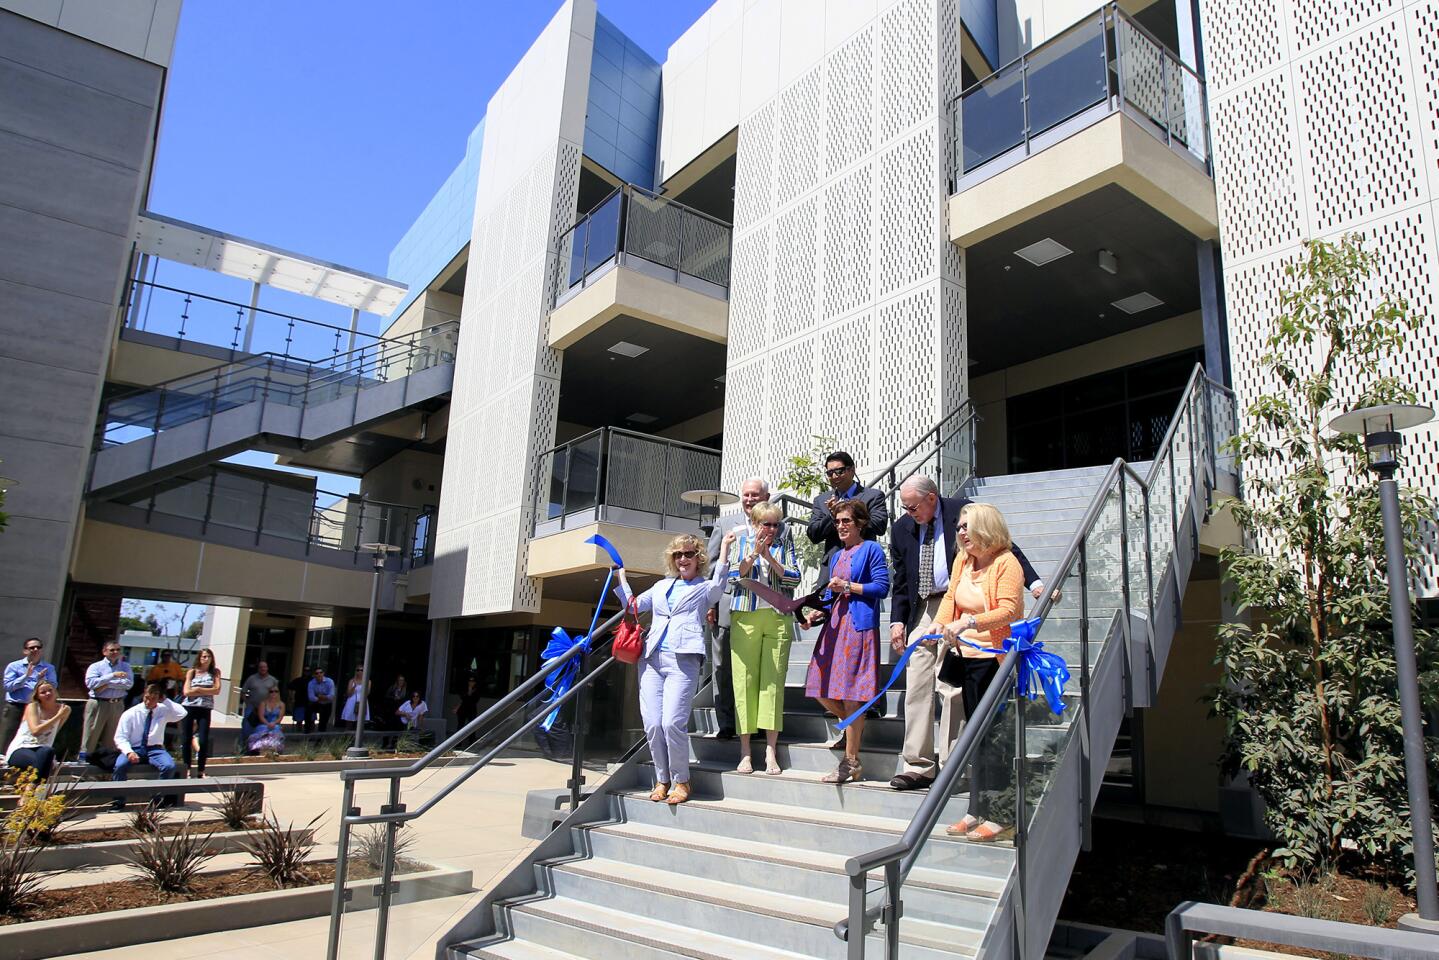 Newport-Mesa Unified School District board and staff members celebrate after a ribbon-cutting for Corona del Mar Middle School's brand new 7th- and 8th-grade enclave building on Wednesday in Newport Beach. (Kevin Chang/ Daily Pilot)